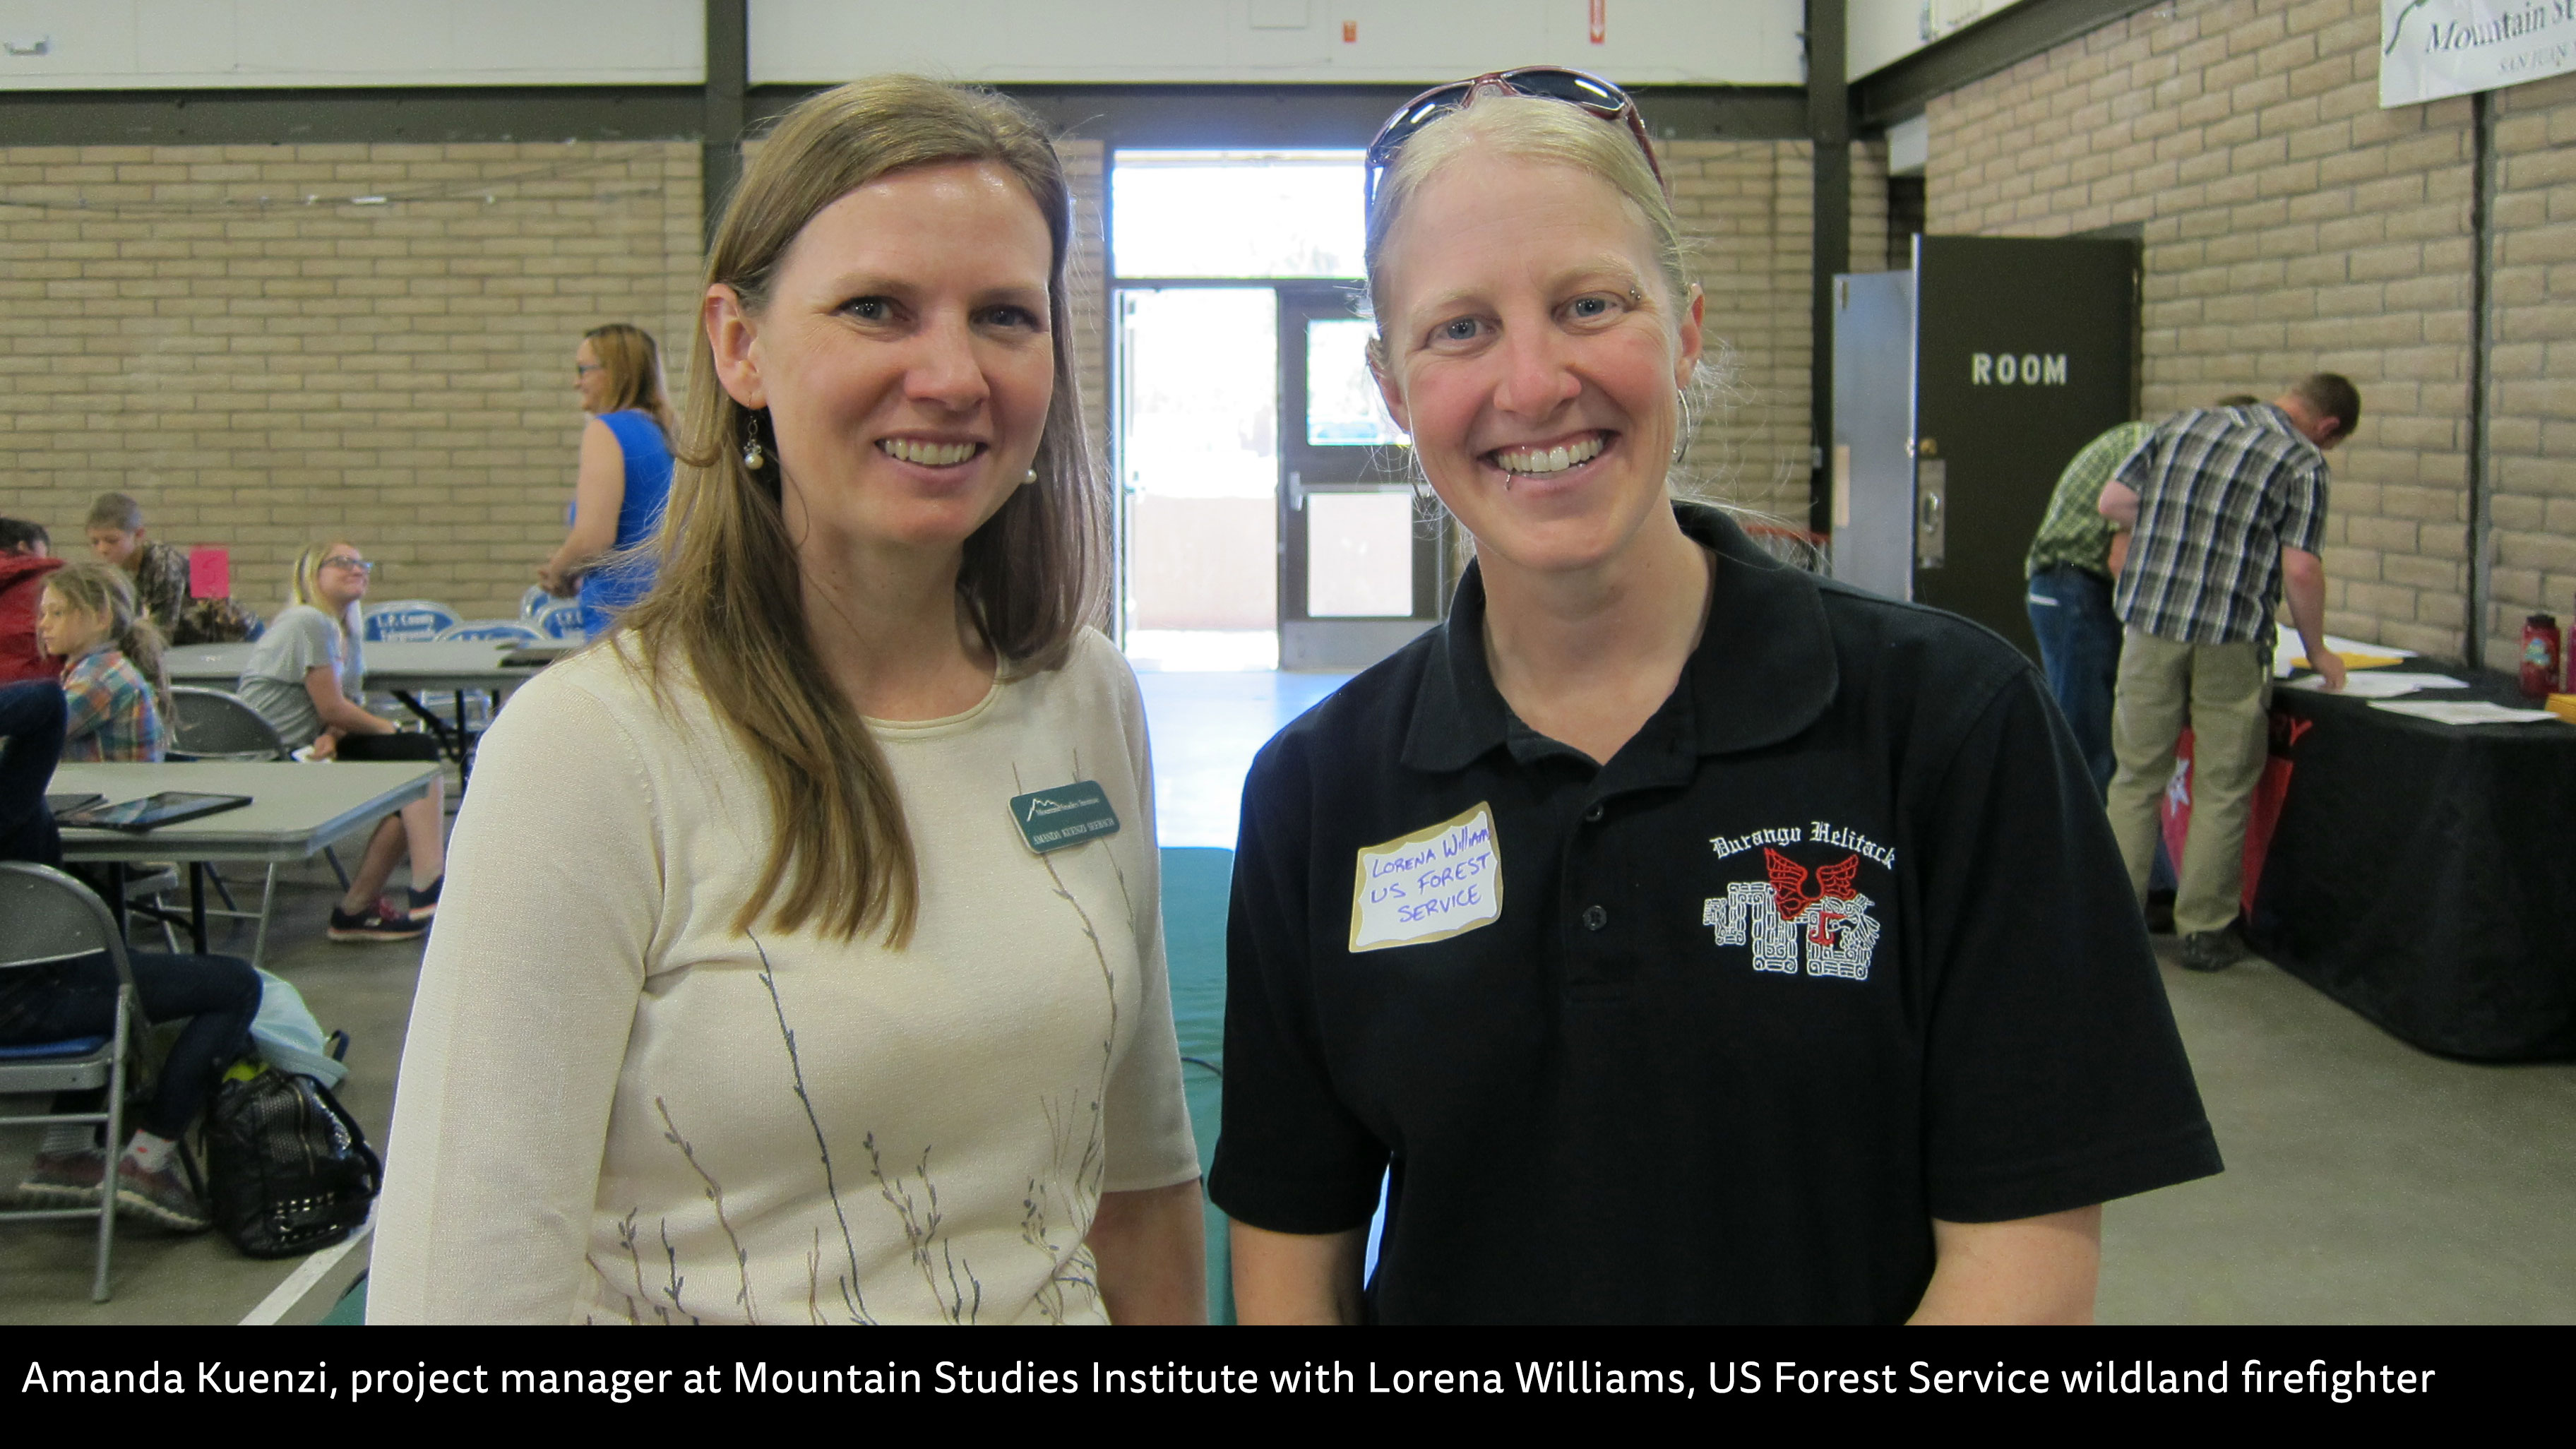 Amanda Kuenzi, project manager at Mountain Studies Institute with Lorena Williams, US Forest Service wildland firefighter